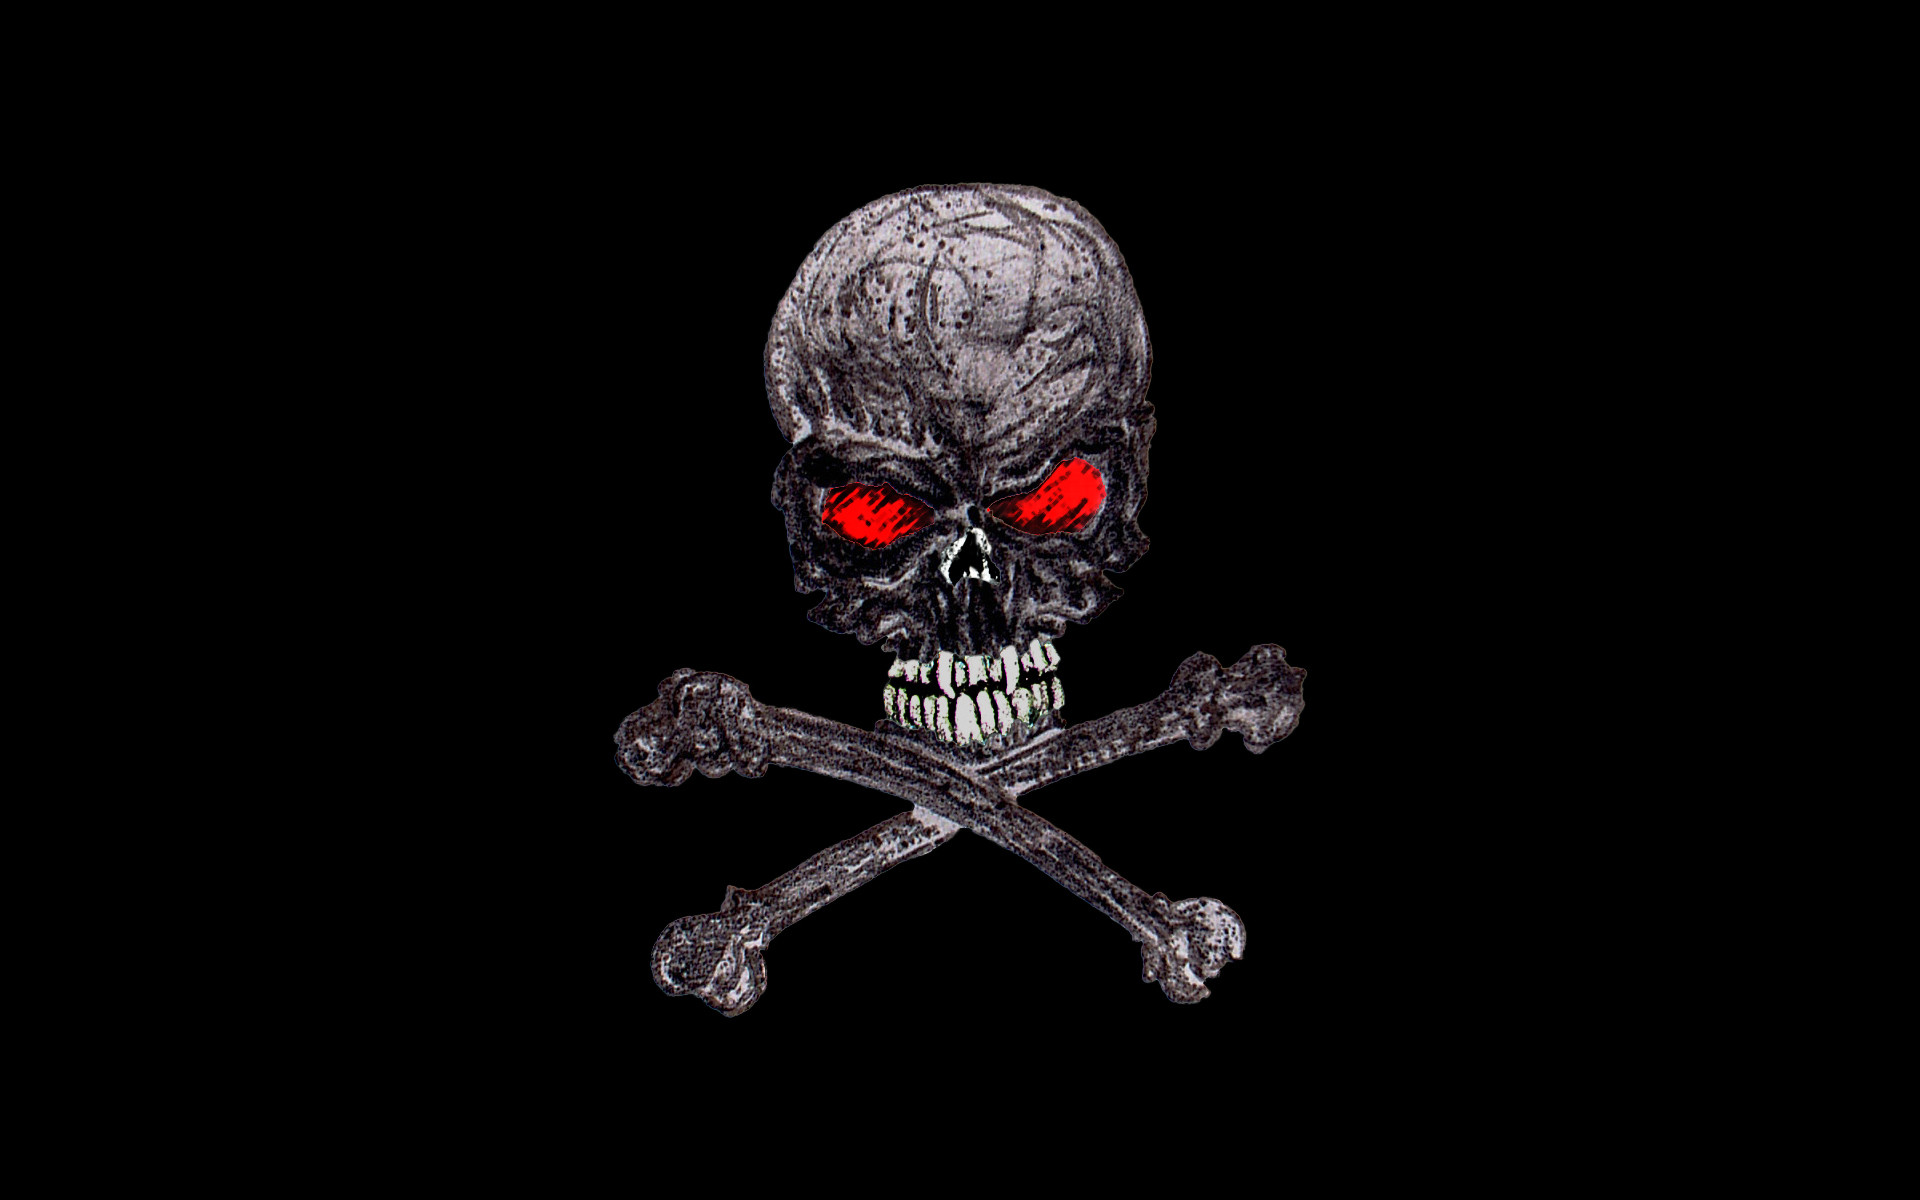 Moving Skull Wallpapers Hd 62 Images